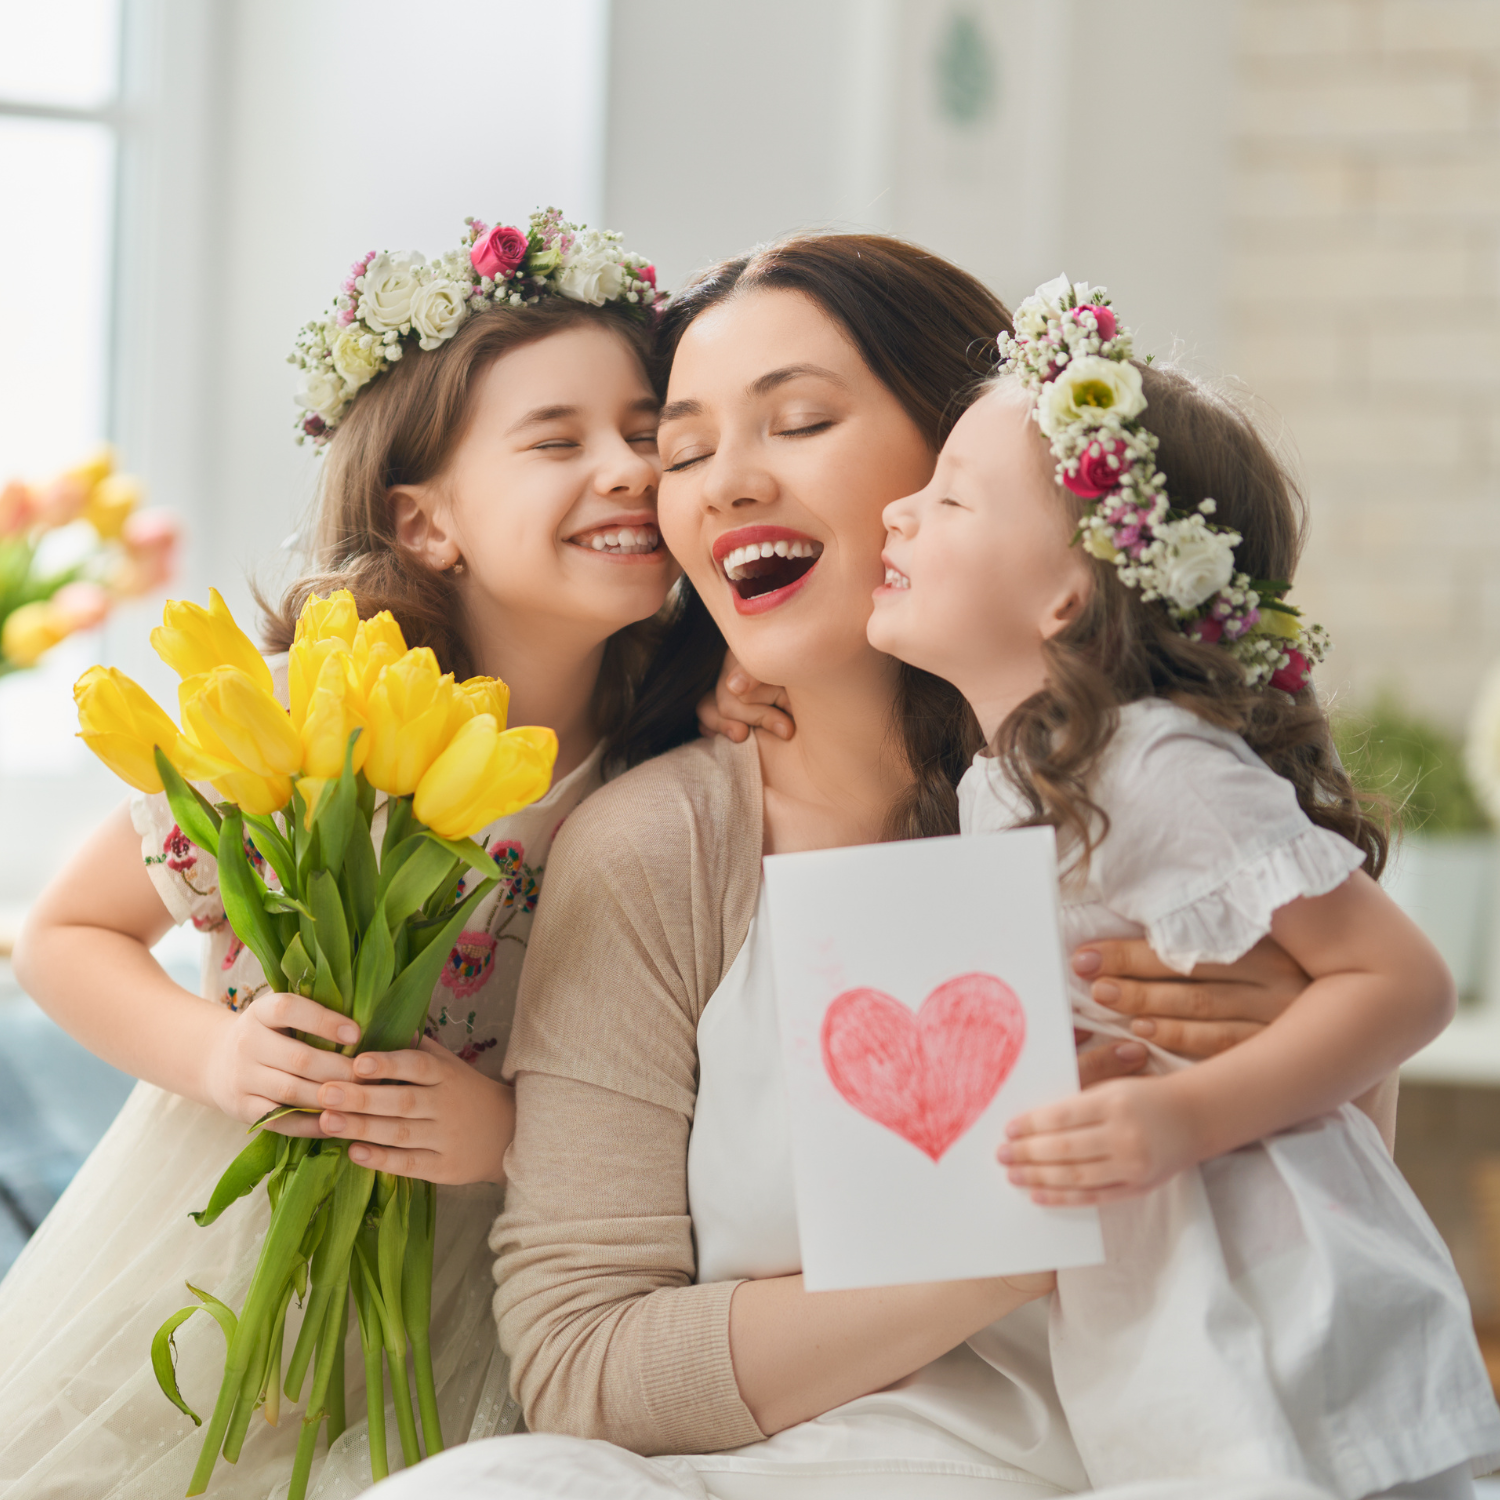 Two children hugging and kissing their mum while gifting a heart card and daffodils | Mother's Day - Clair de Lune UK